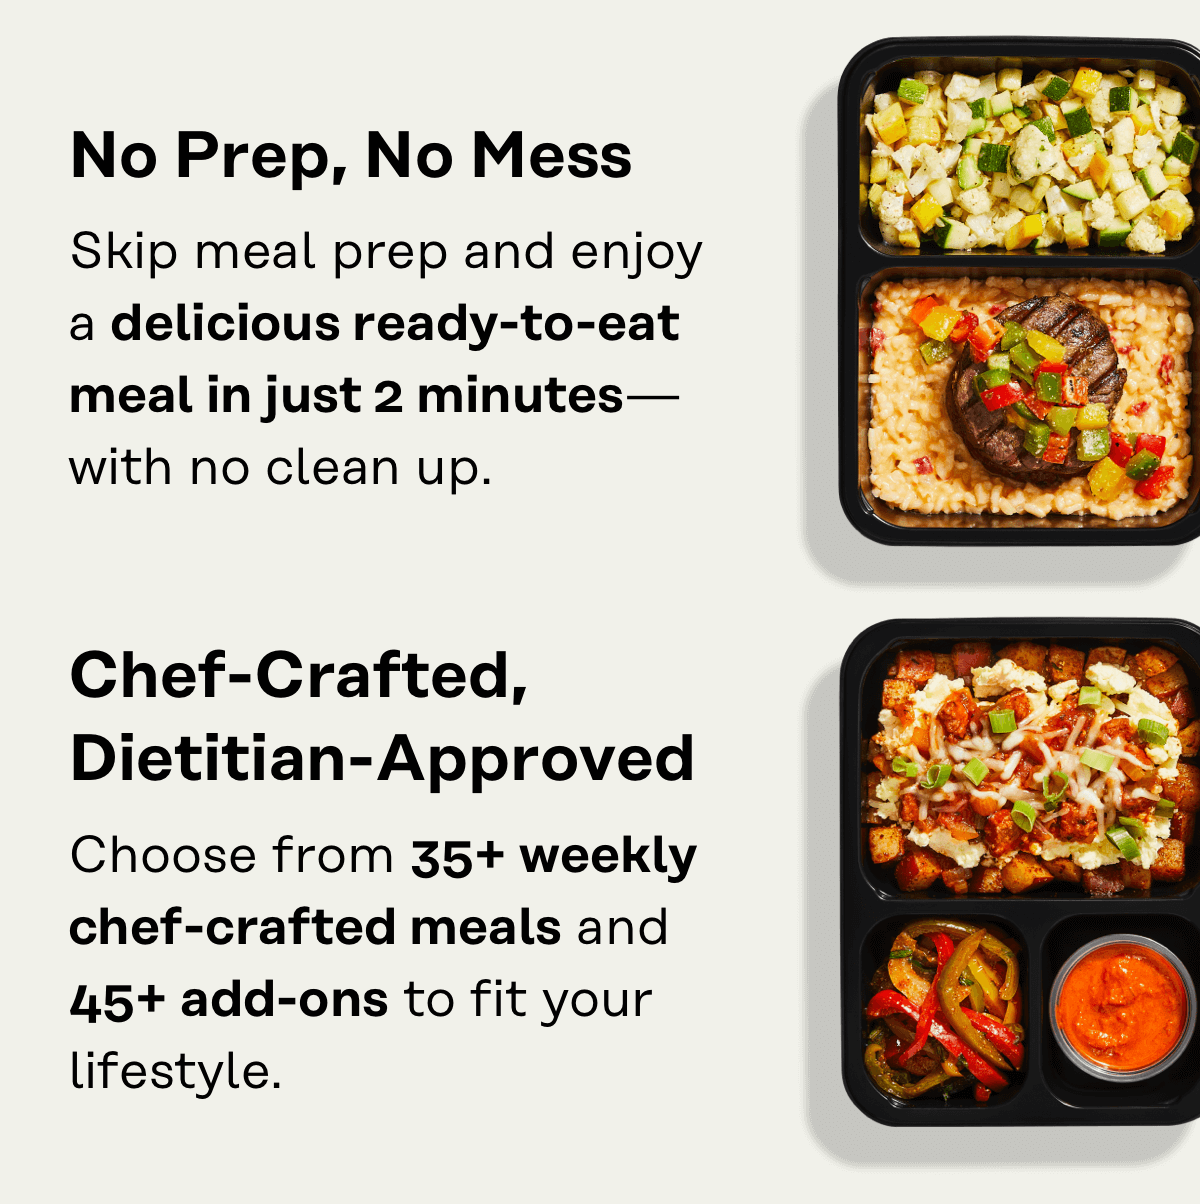 No prep, no mess, skip meal prep and enjoy a delicious ready-to-eat meal in just 2 minutes -- with no clean up.